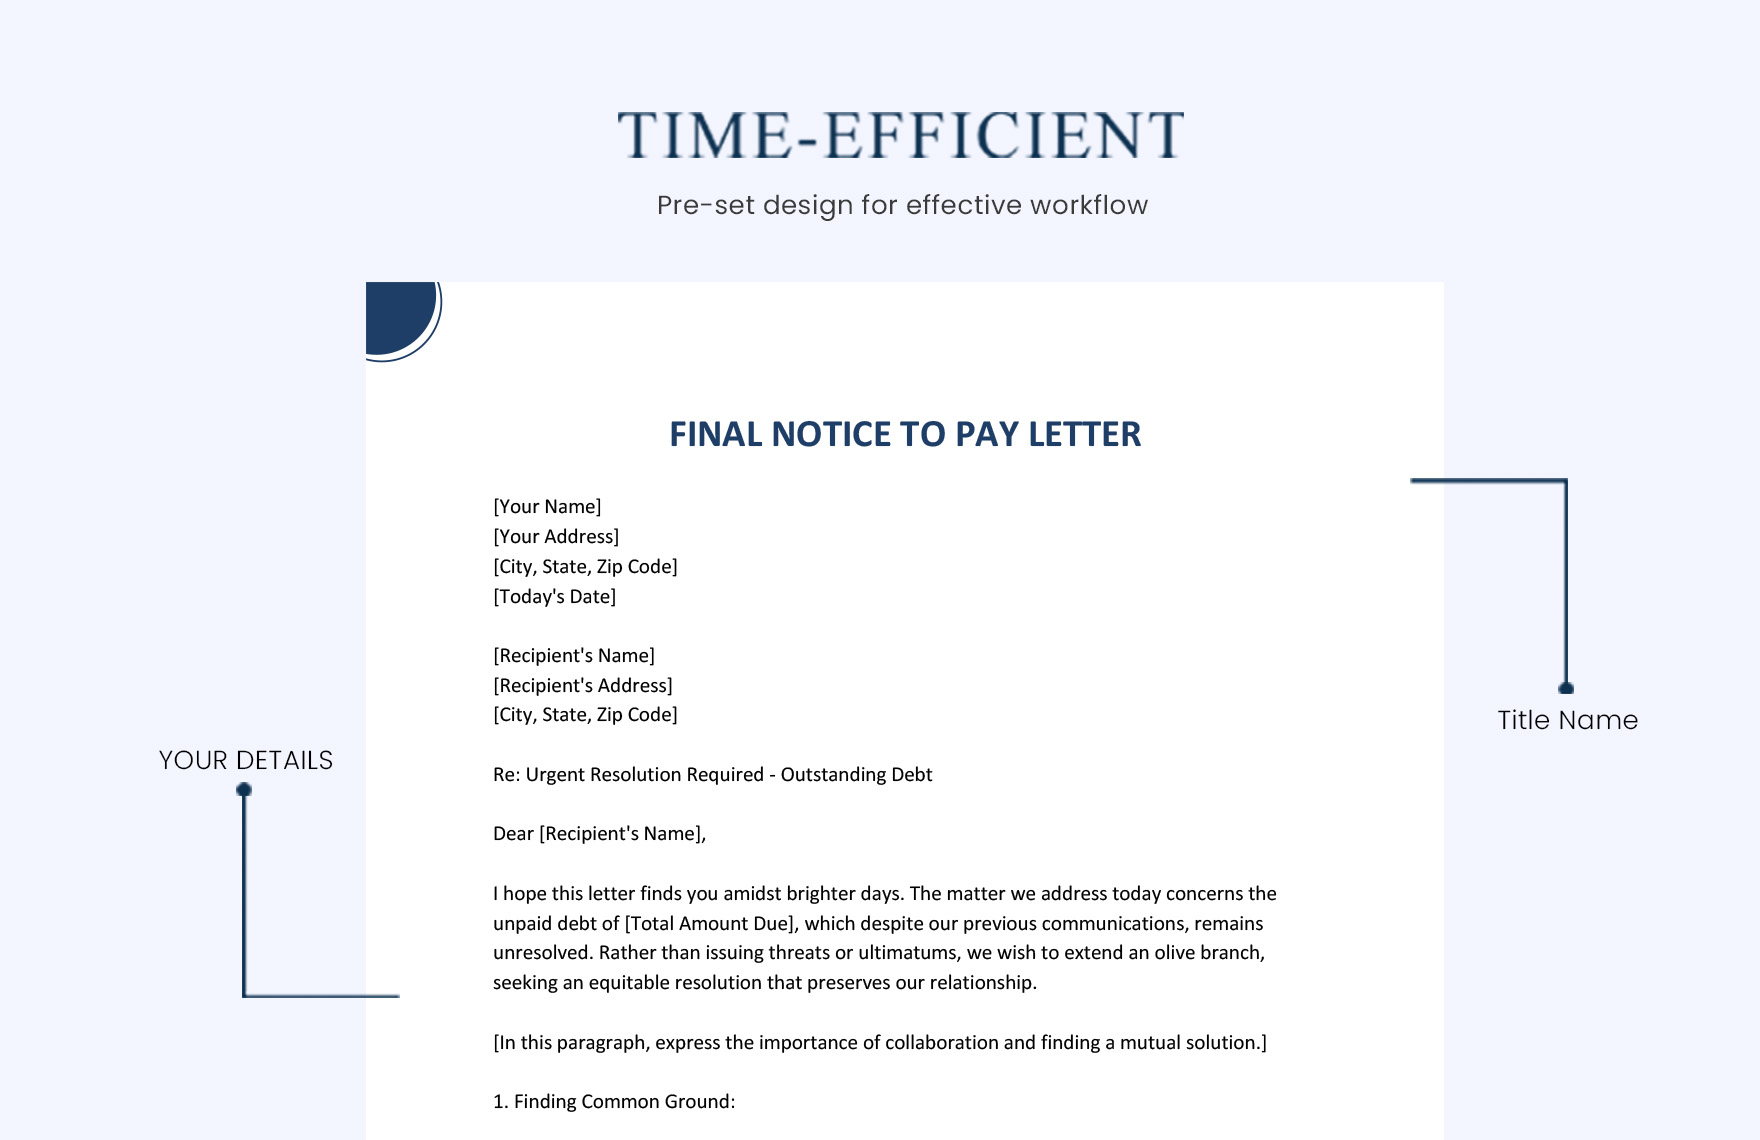 Final Notice To Pay Letter